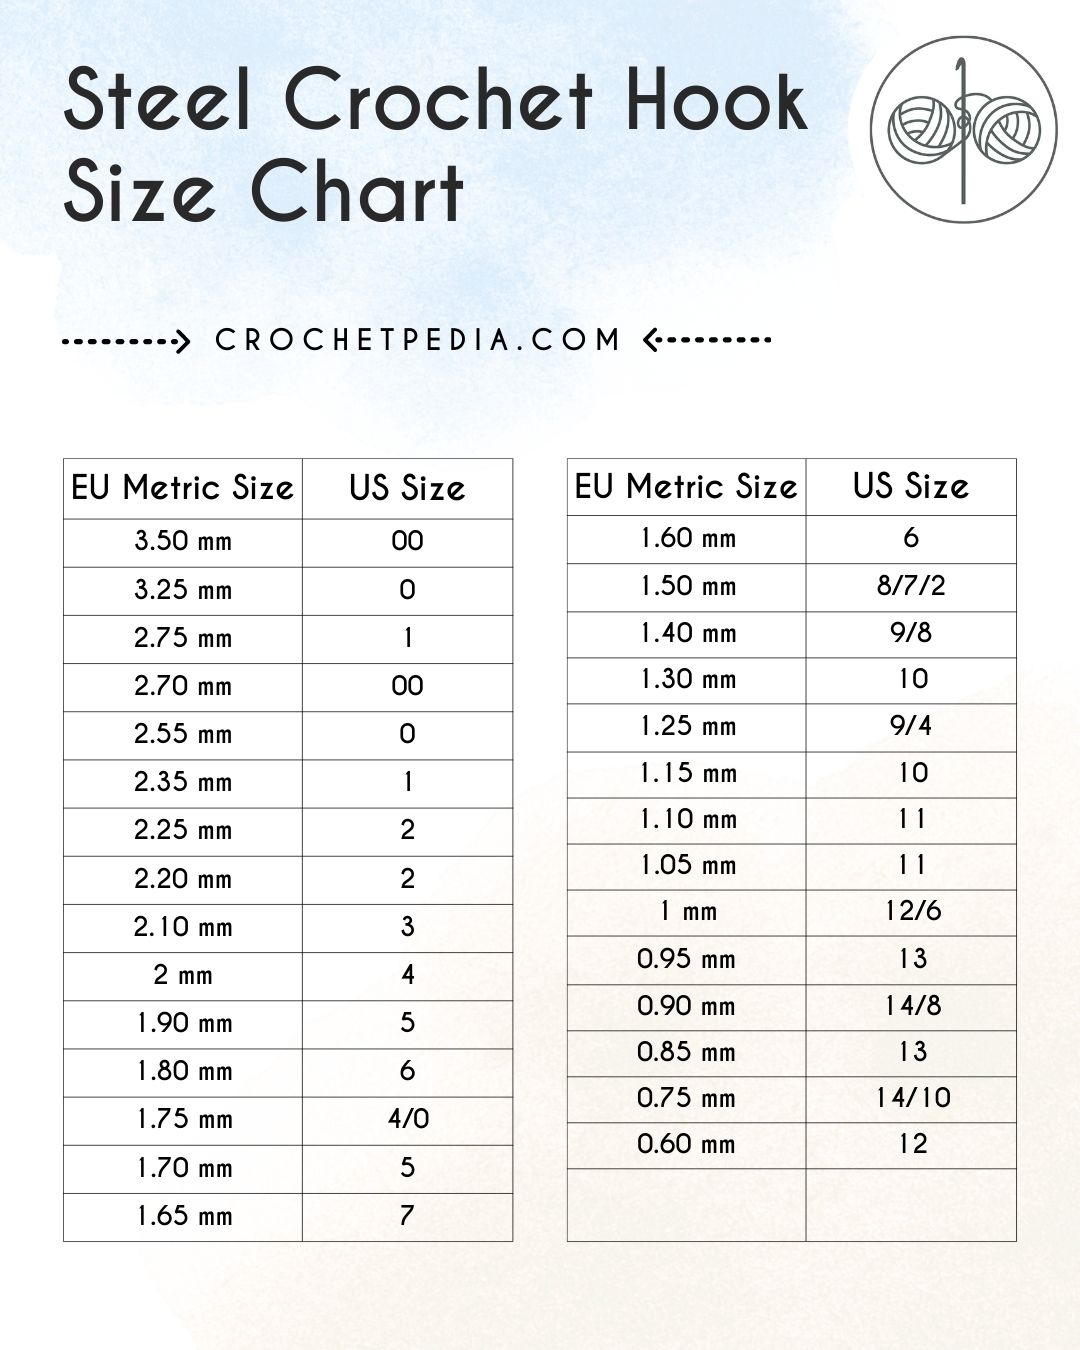 Crochet Hook Sizes - Everything You Need to Know - Crochet 365, H Crochet  Hook